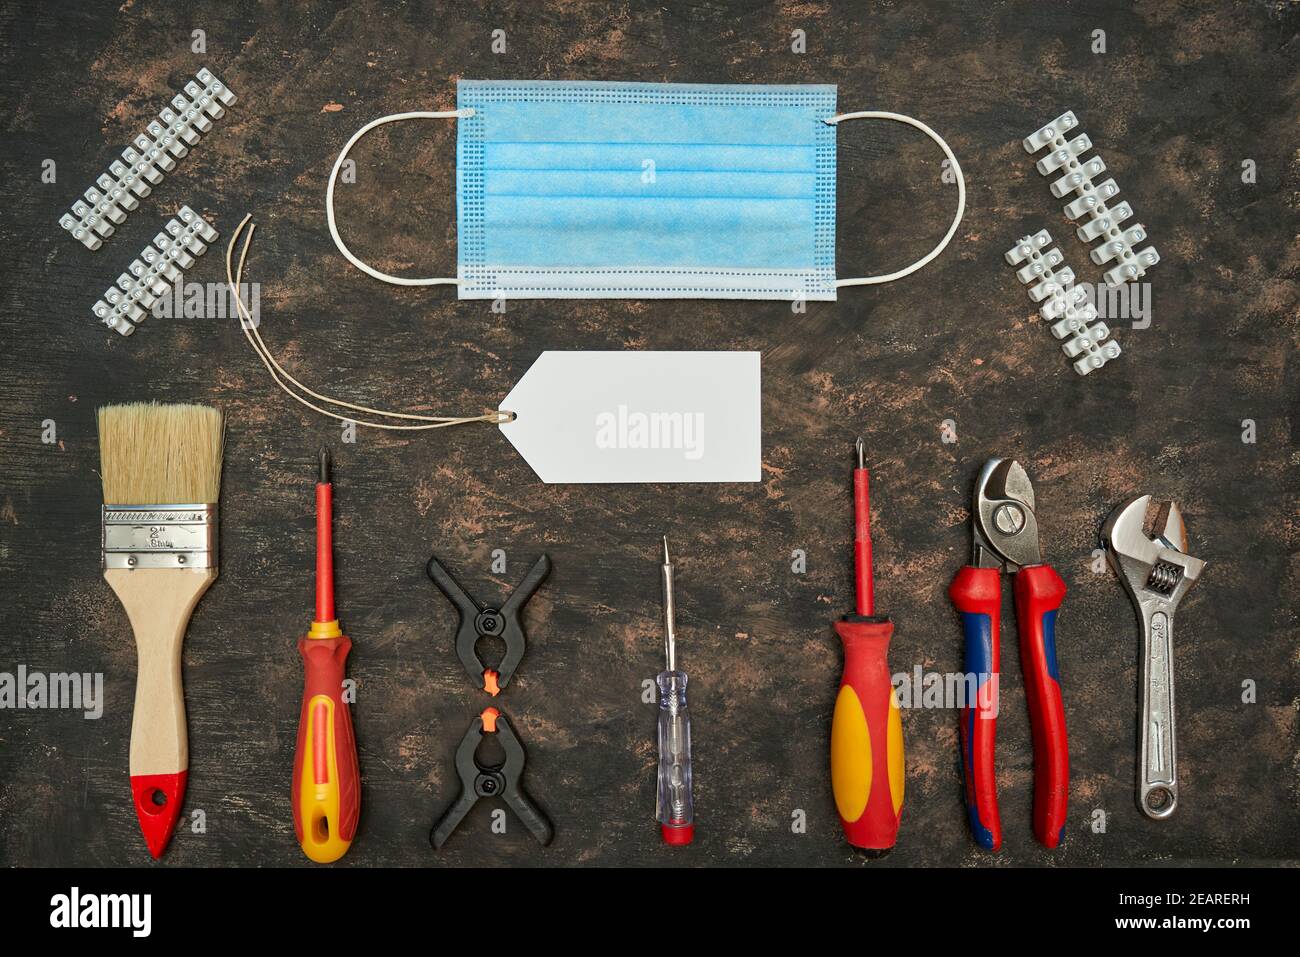 Tools and masc for work with covid season Stock Photo